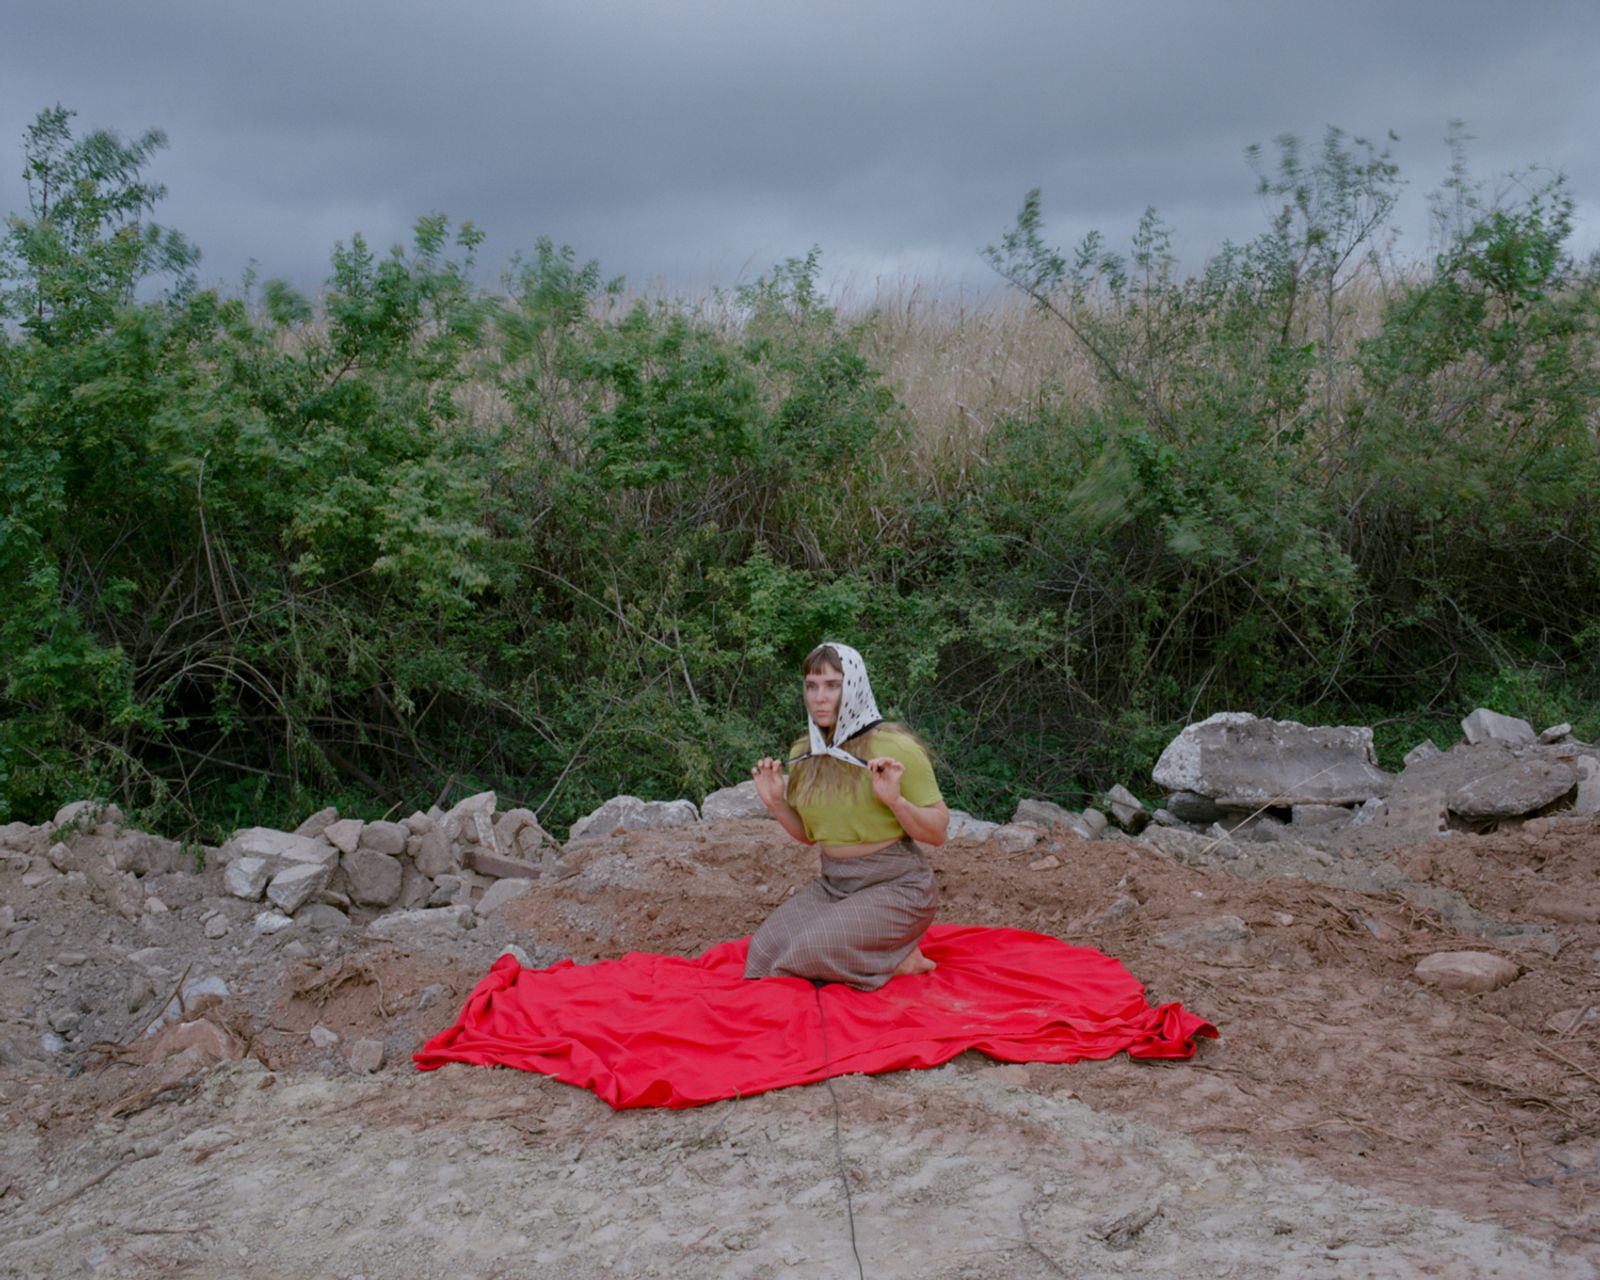 Teva Cosic Embraces Her Origins With a Project That Reflects on Identity and Displacement